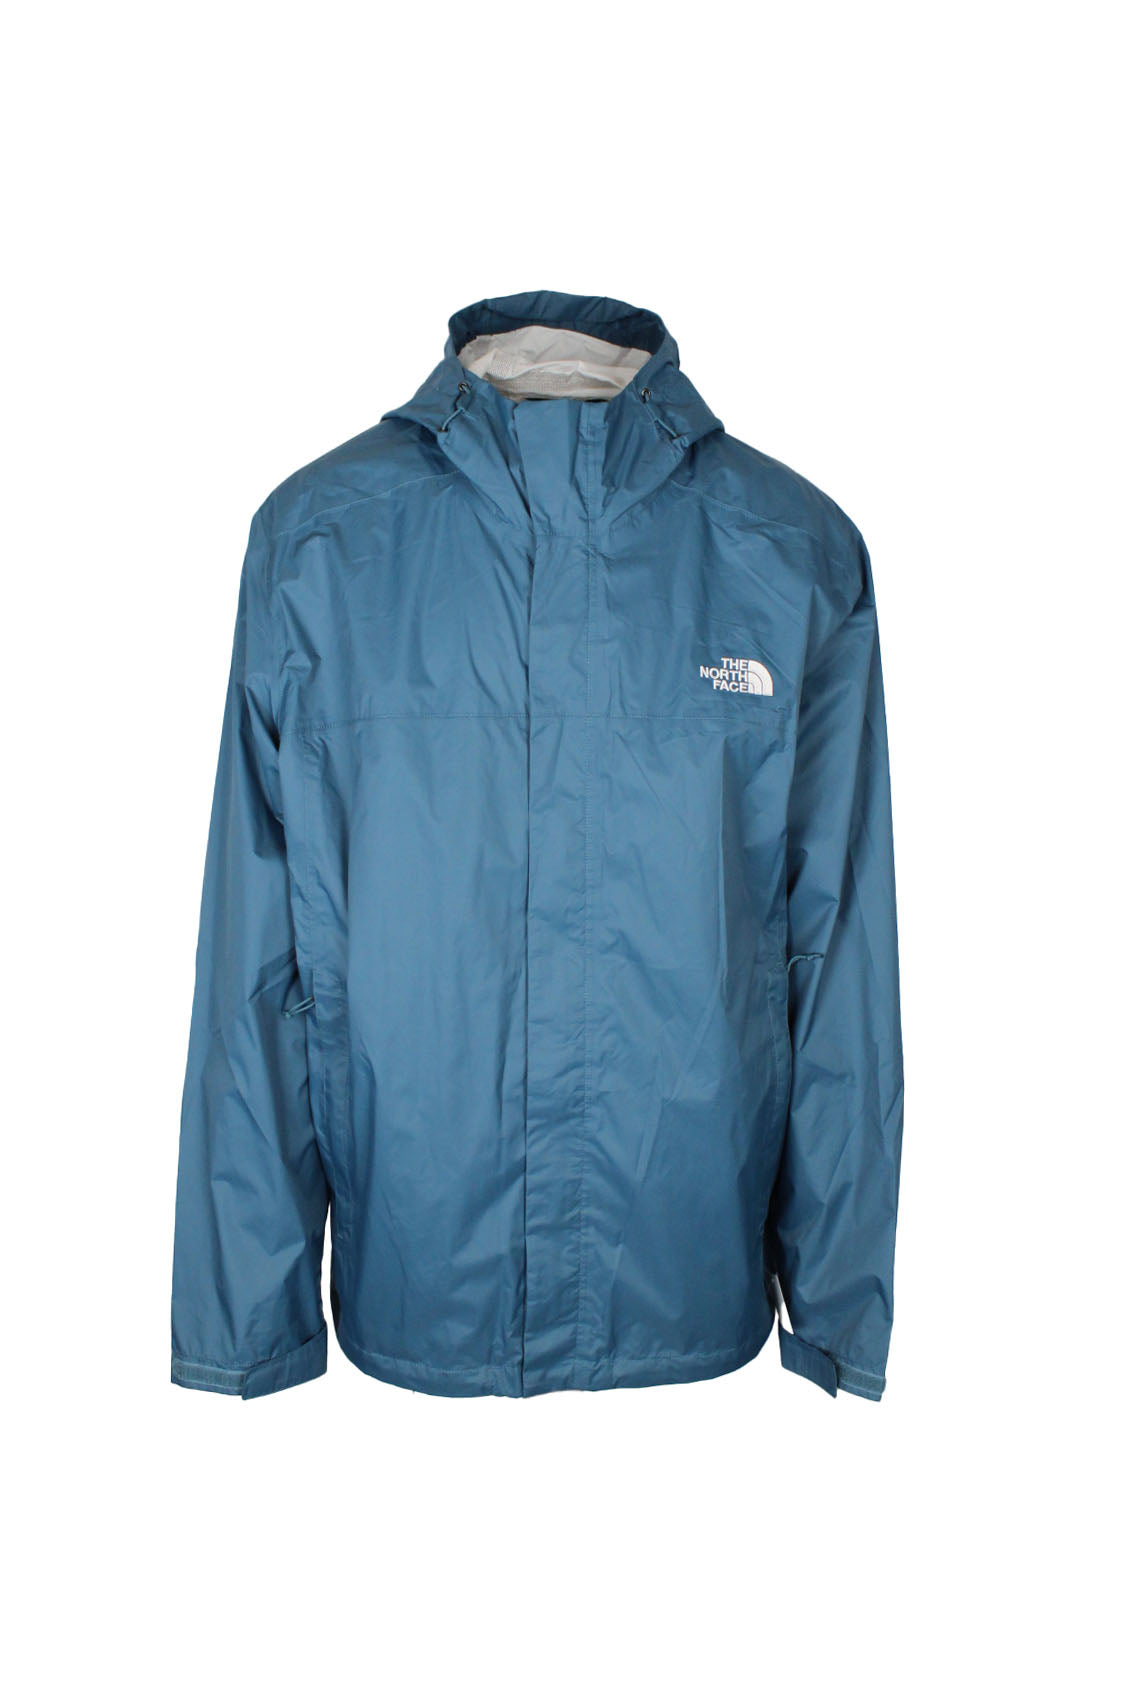 front view of the north face steel blue velcro/zip up waterproof packable jacket. features ‘the north face’ logo embroidered at left breast/back right, side zip hand pockets, velcro straps at cuffs, underarm zip vents, drawstrings at hood/hem, and left pocket doubles as stow pouch.